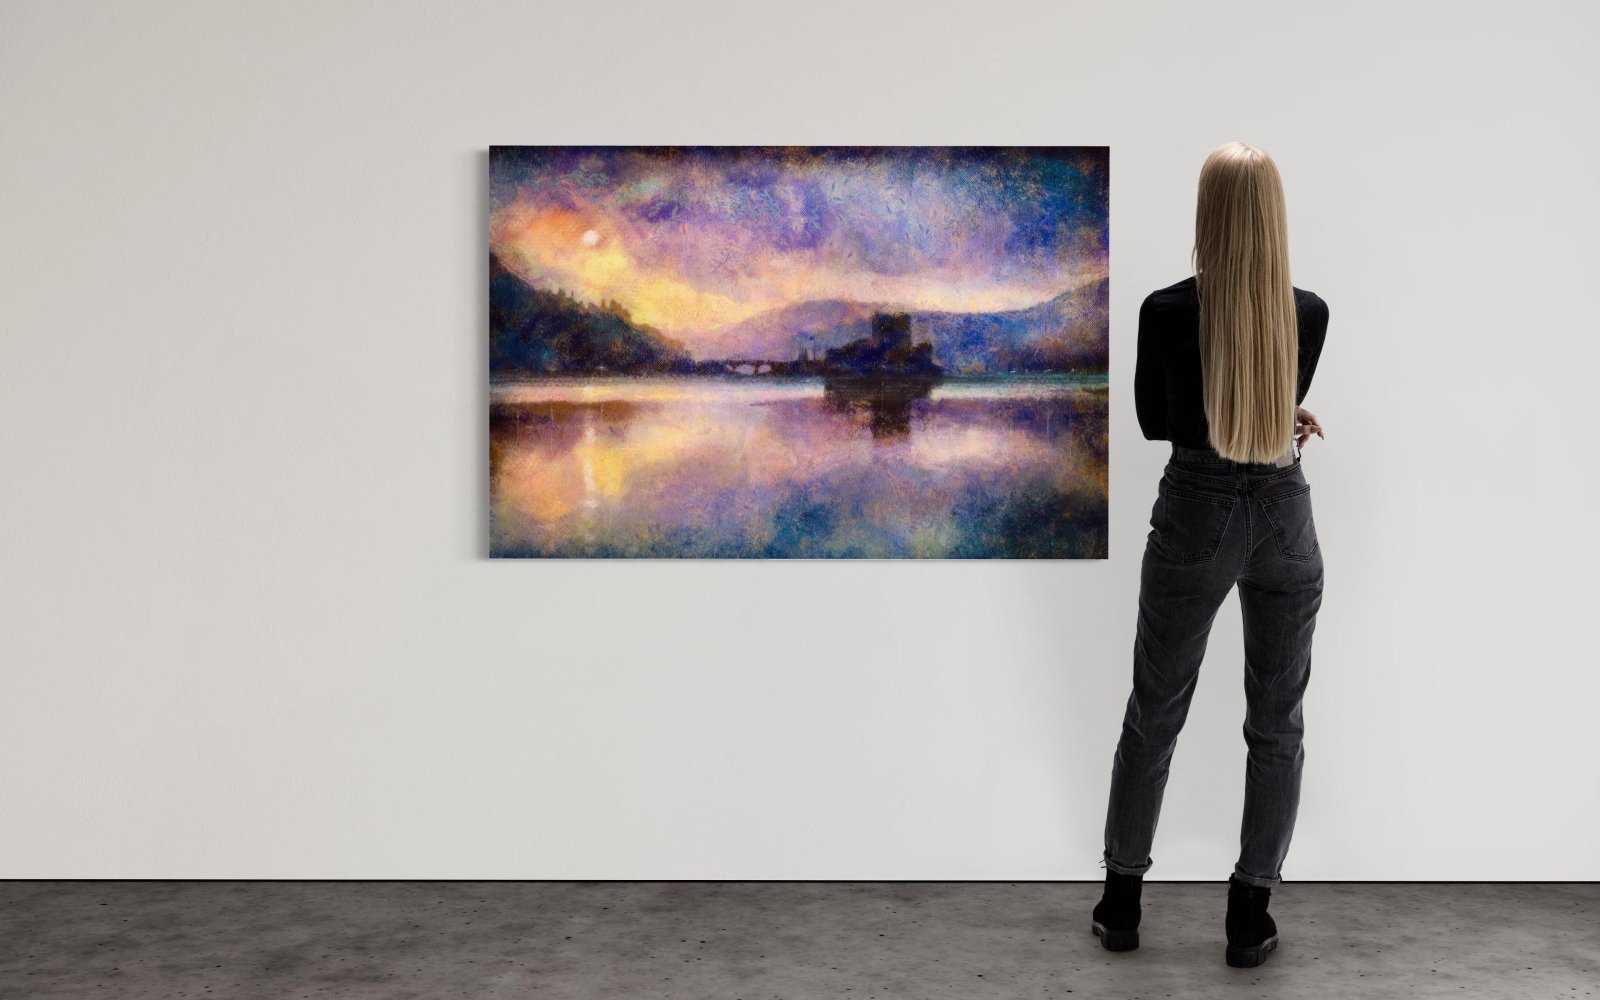 Eilean Donan Castle Moonlight 60x40 inch Stretched Canvas Statement Wall Art-Statement Wall Art-Scottish Castles Art Gallery-Paintings, Prints, Homeware, Art Gifts From Scotland By Scottish Artist Kevin Hunter